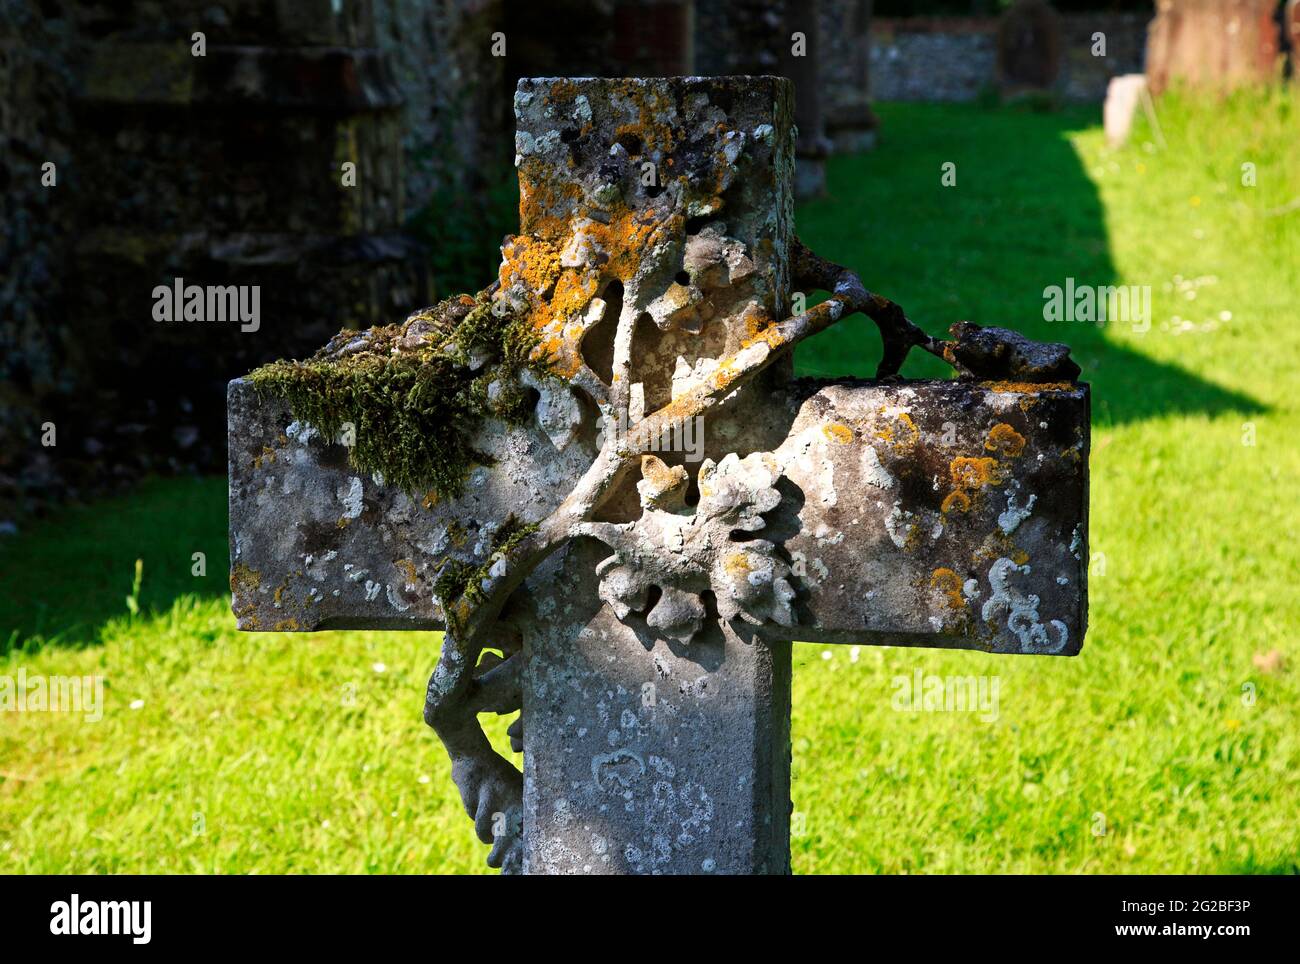 A headstone in the shape of a cross with vine decoration and covered in lichens and mosses at the village Church in Irstead, Norfolk, England, UK. Stock Photo